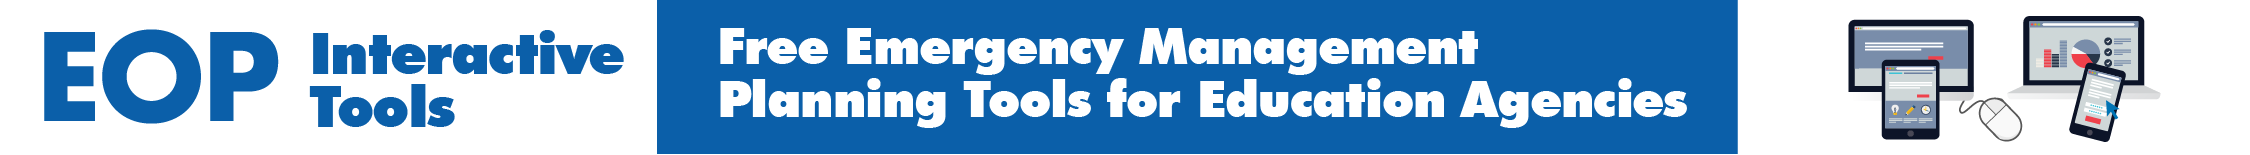 EOP Interactive Tools - Free Emergency Management Tools for Education Agencies